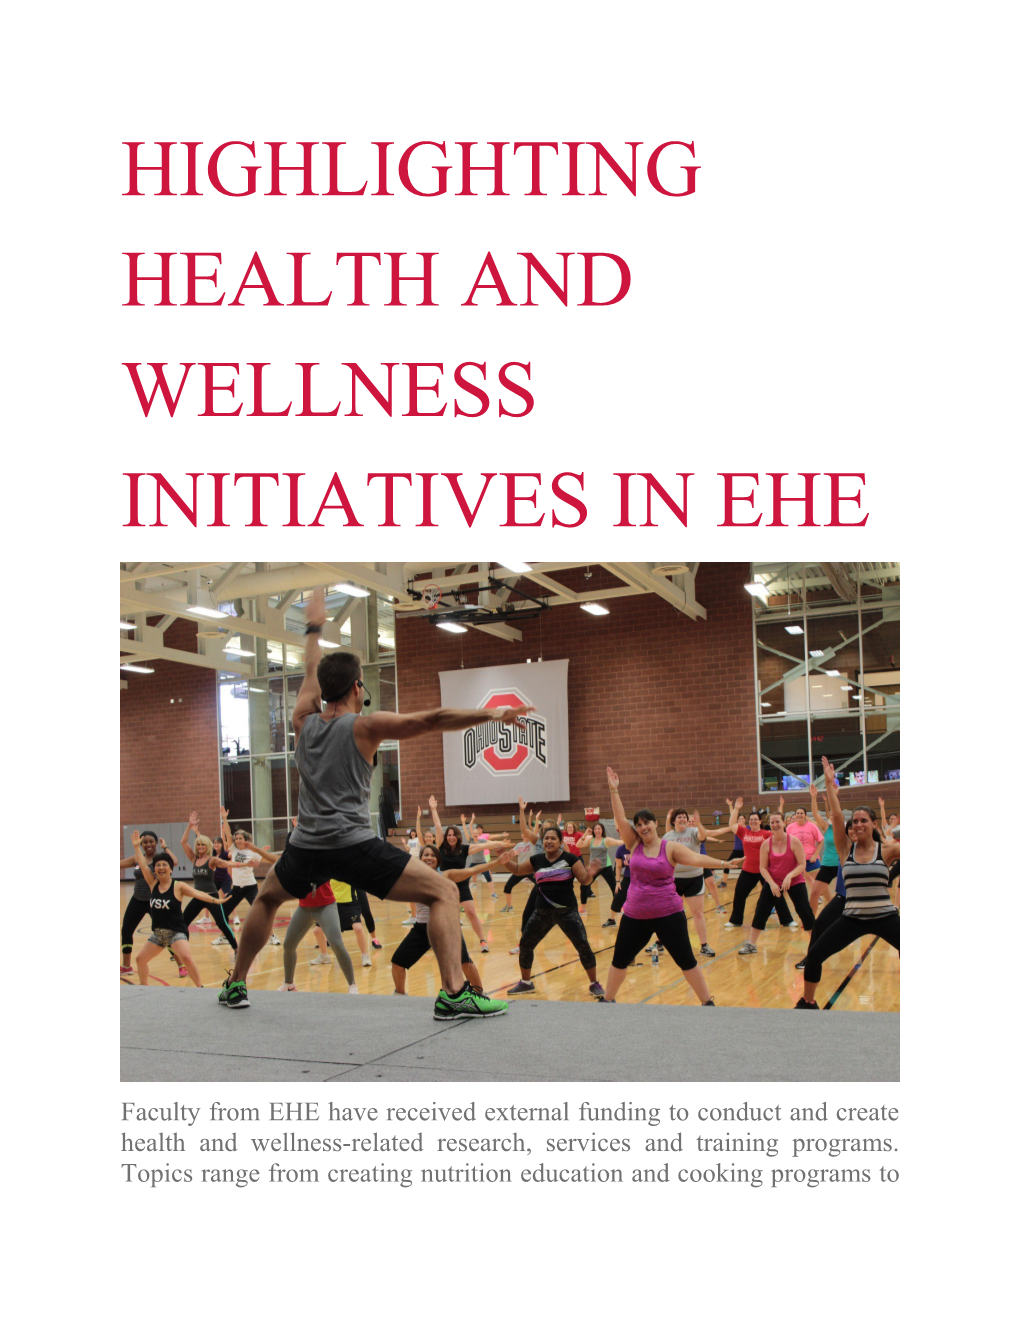 Highlighting Health and Wellness Initiatives in EHE